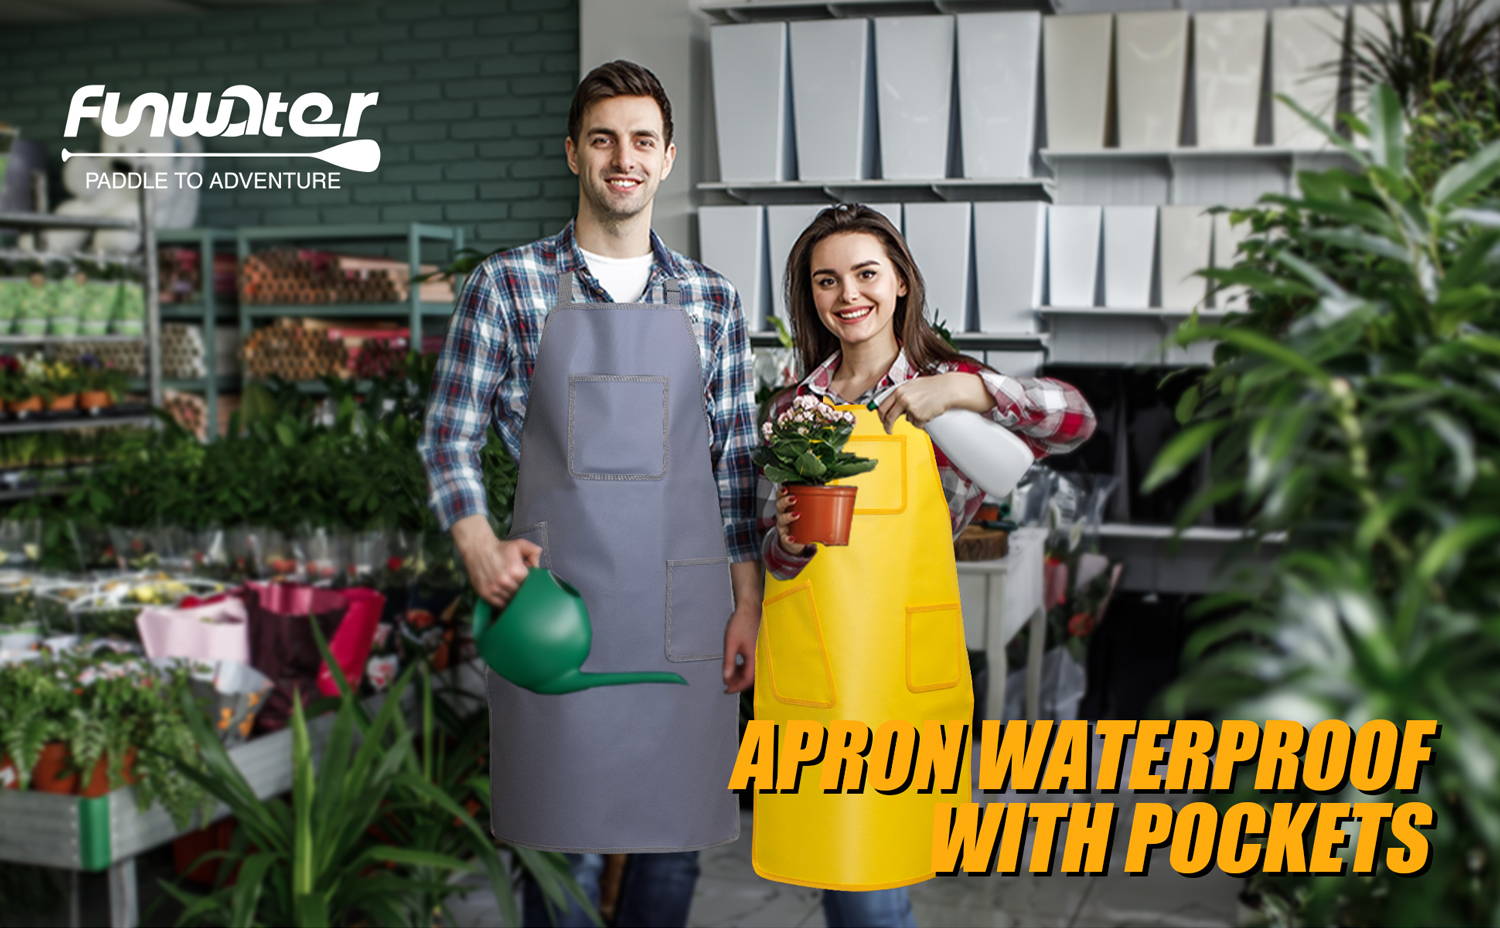 Standing in the garden are a man wearing a gray Funwater apron for men and a woman wearing a yellow apron for women.